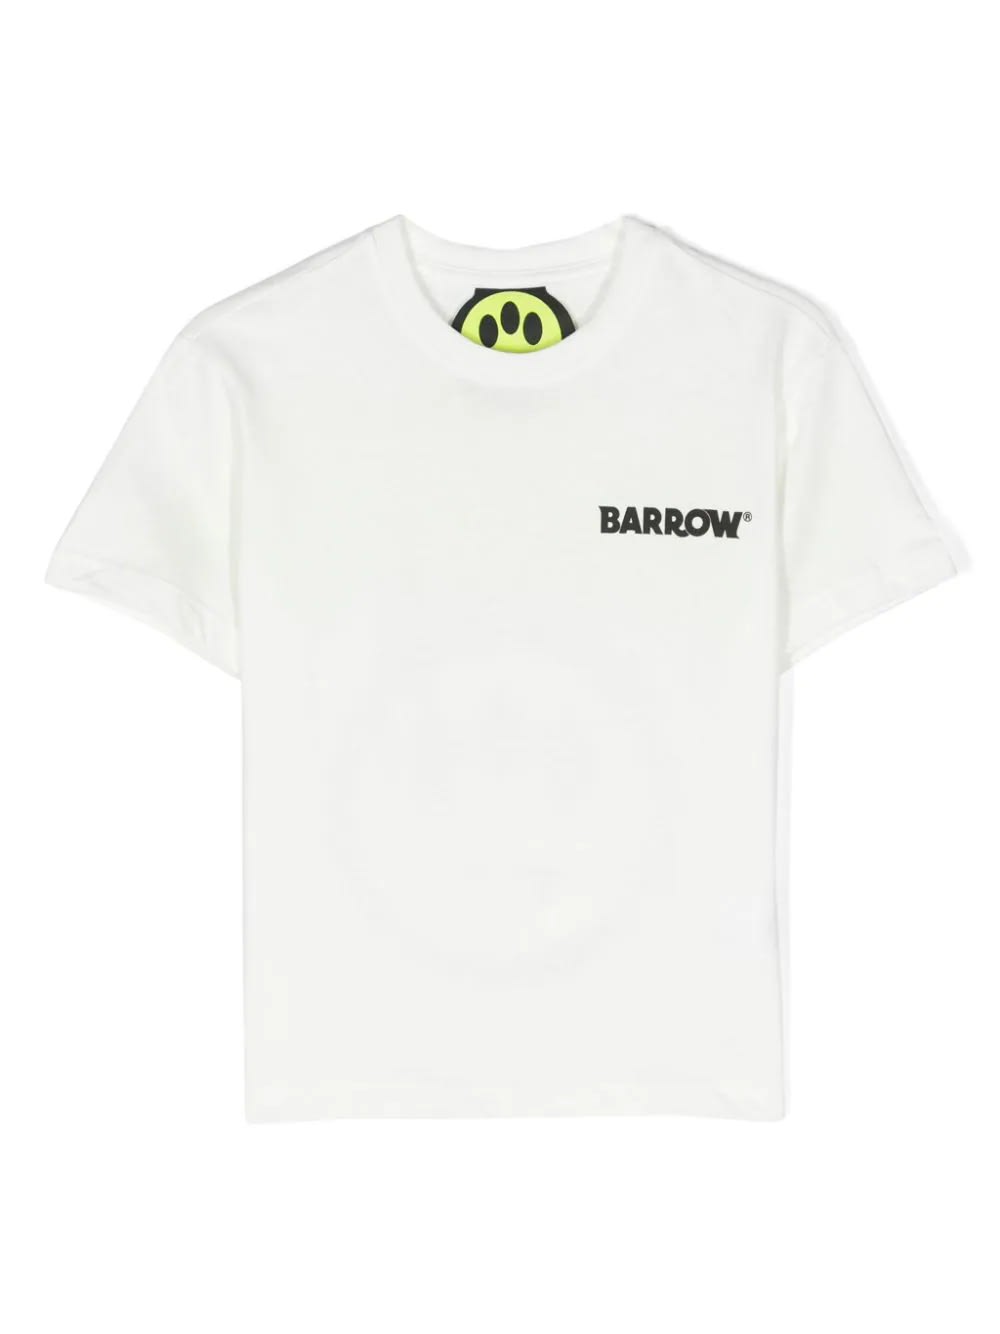 Barrow Kids' White T-shirt With Front And Back Logo